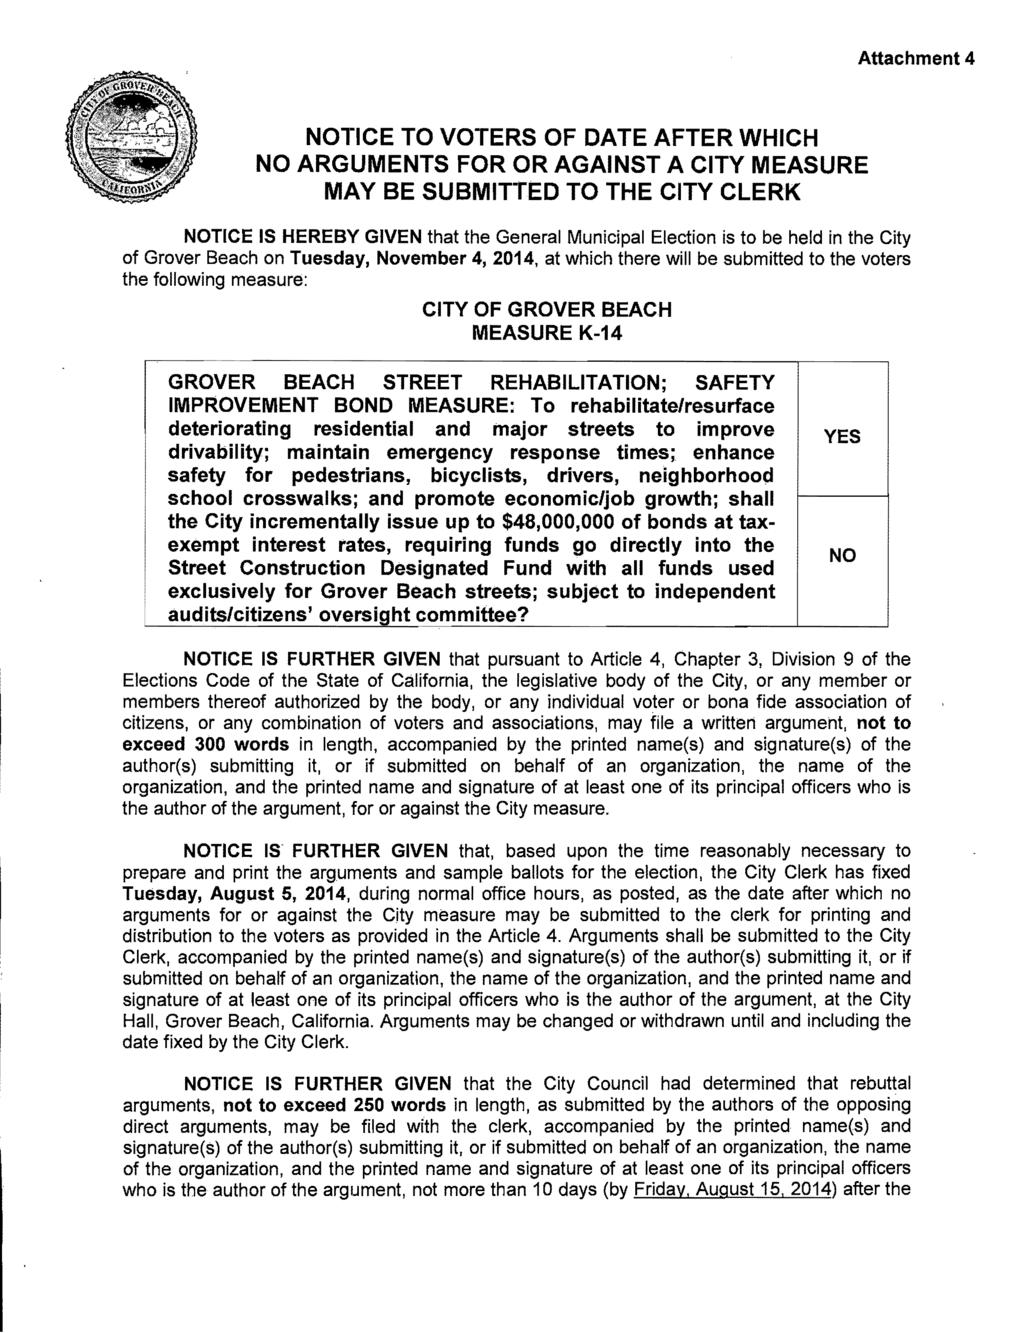 Attachment 4 NOTICE TO VOTERS OF DATE AFTER WHICH NO ARGUMENTS FOR OR AGAINST A CITY MEASURE MAY BE SUBMITTED TO THE CITY CLERK NOTICE IS HEREBY GIVEN that the General Municipal Election is to be